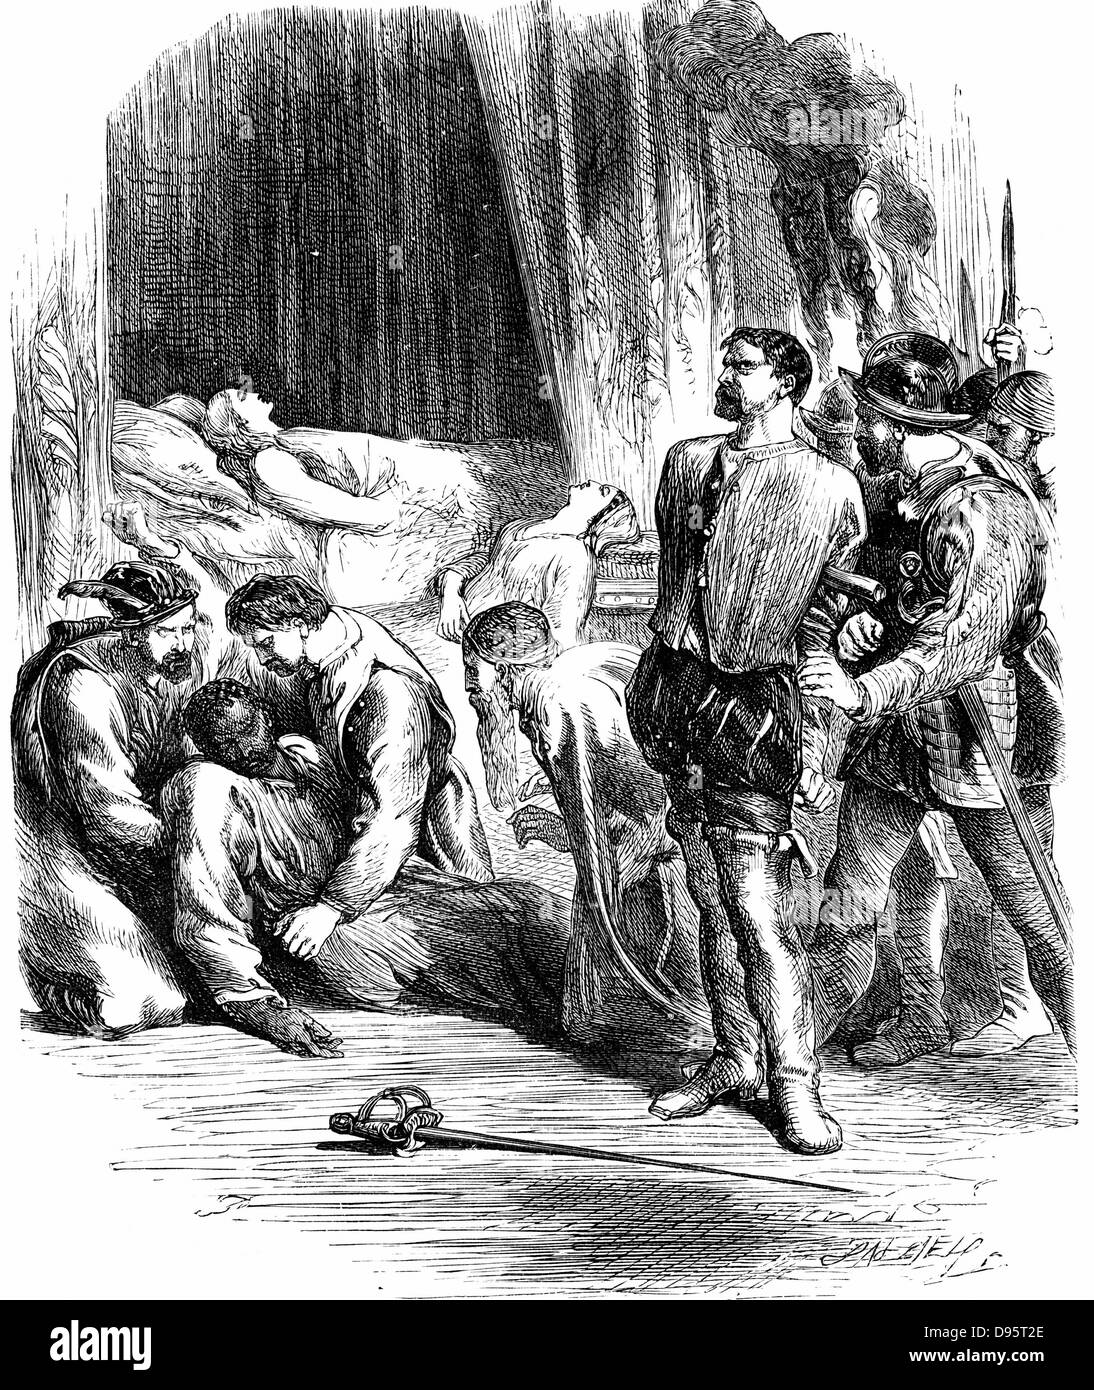 Shakespeare 'Othello' Act 5: Desdemona and Emilia lie dead, Othello has stabbed himself and Iago is taken prisoner. 19th century engraving. Stock Photo